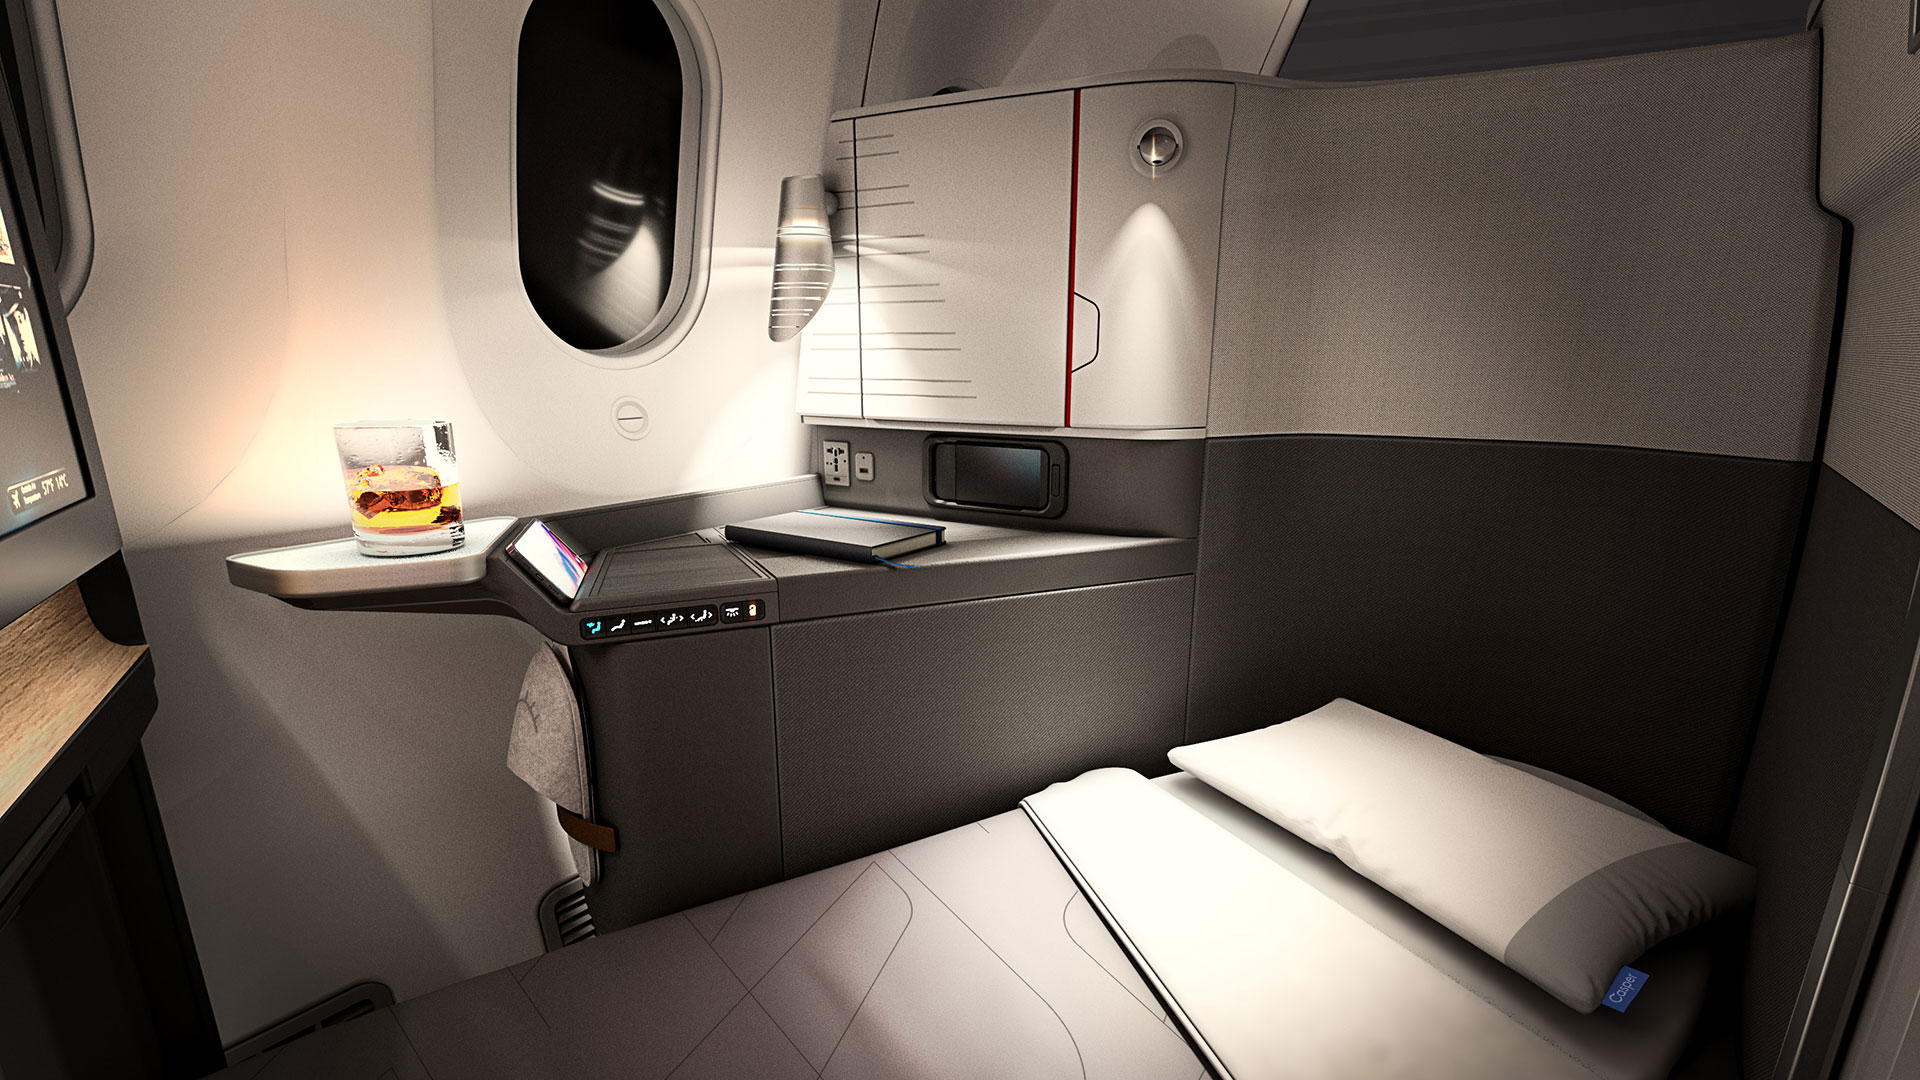 The Boeing 787-9 Flagship Suite offers more comfort with seats reclined and can also convert to a lounger position